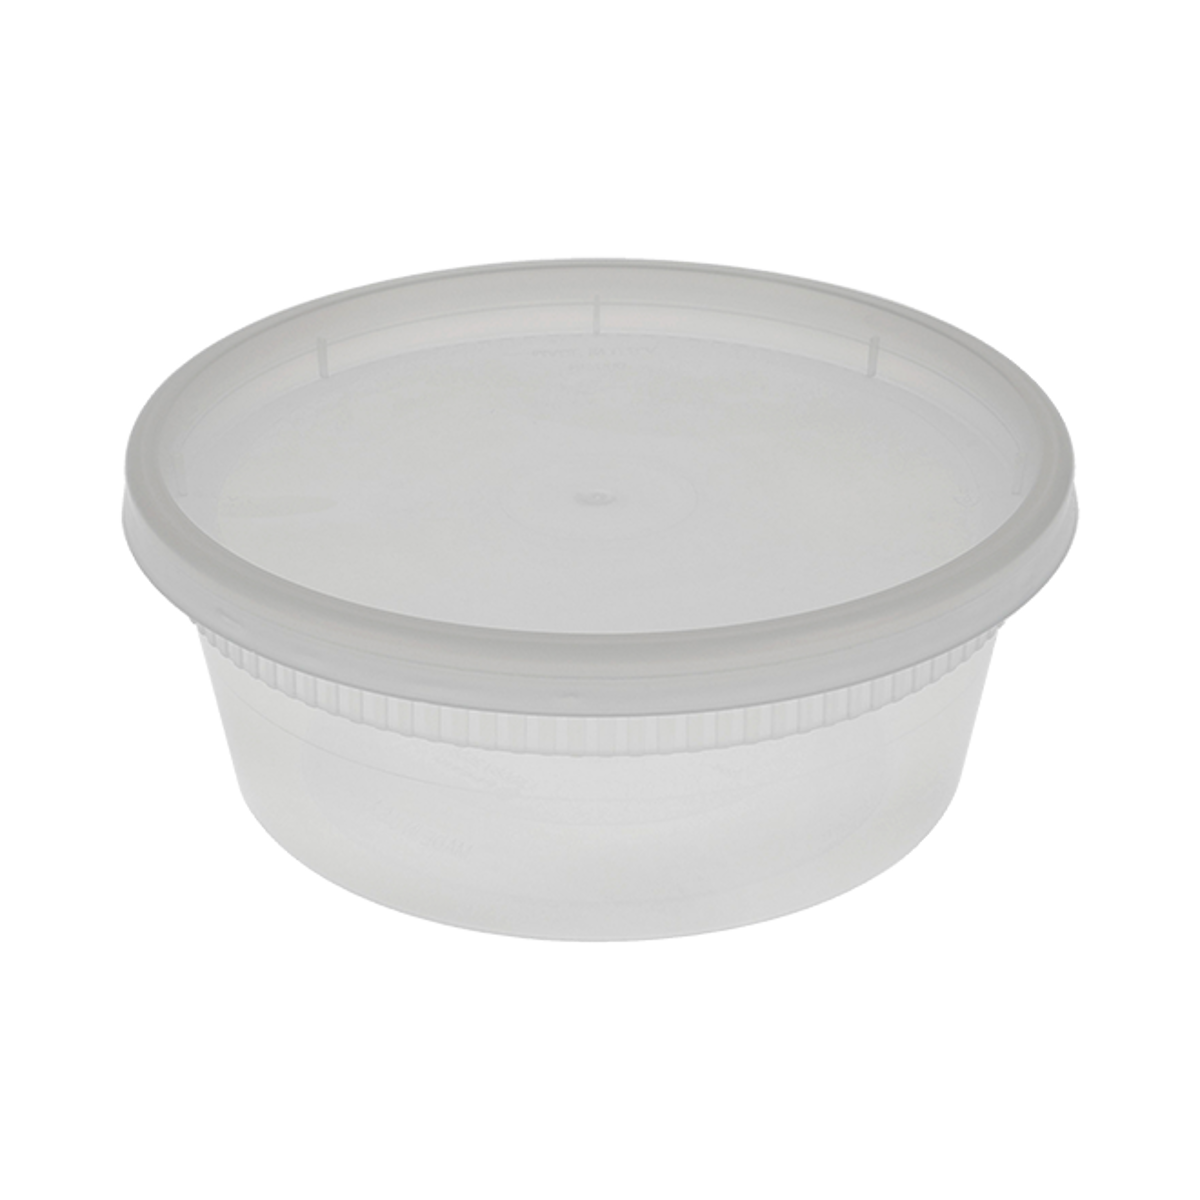 DELItainer® 12 oz. Round Takeout Container and Lid Combo